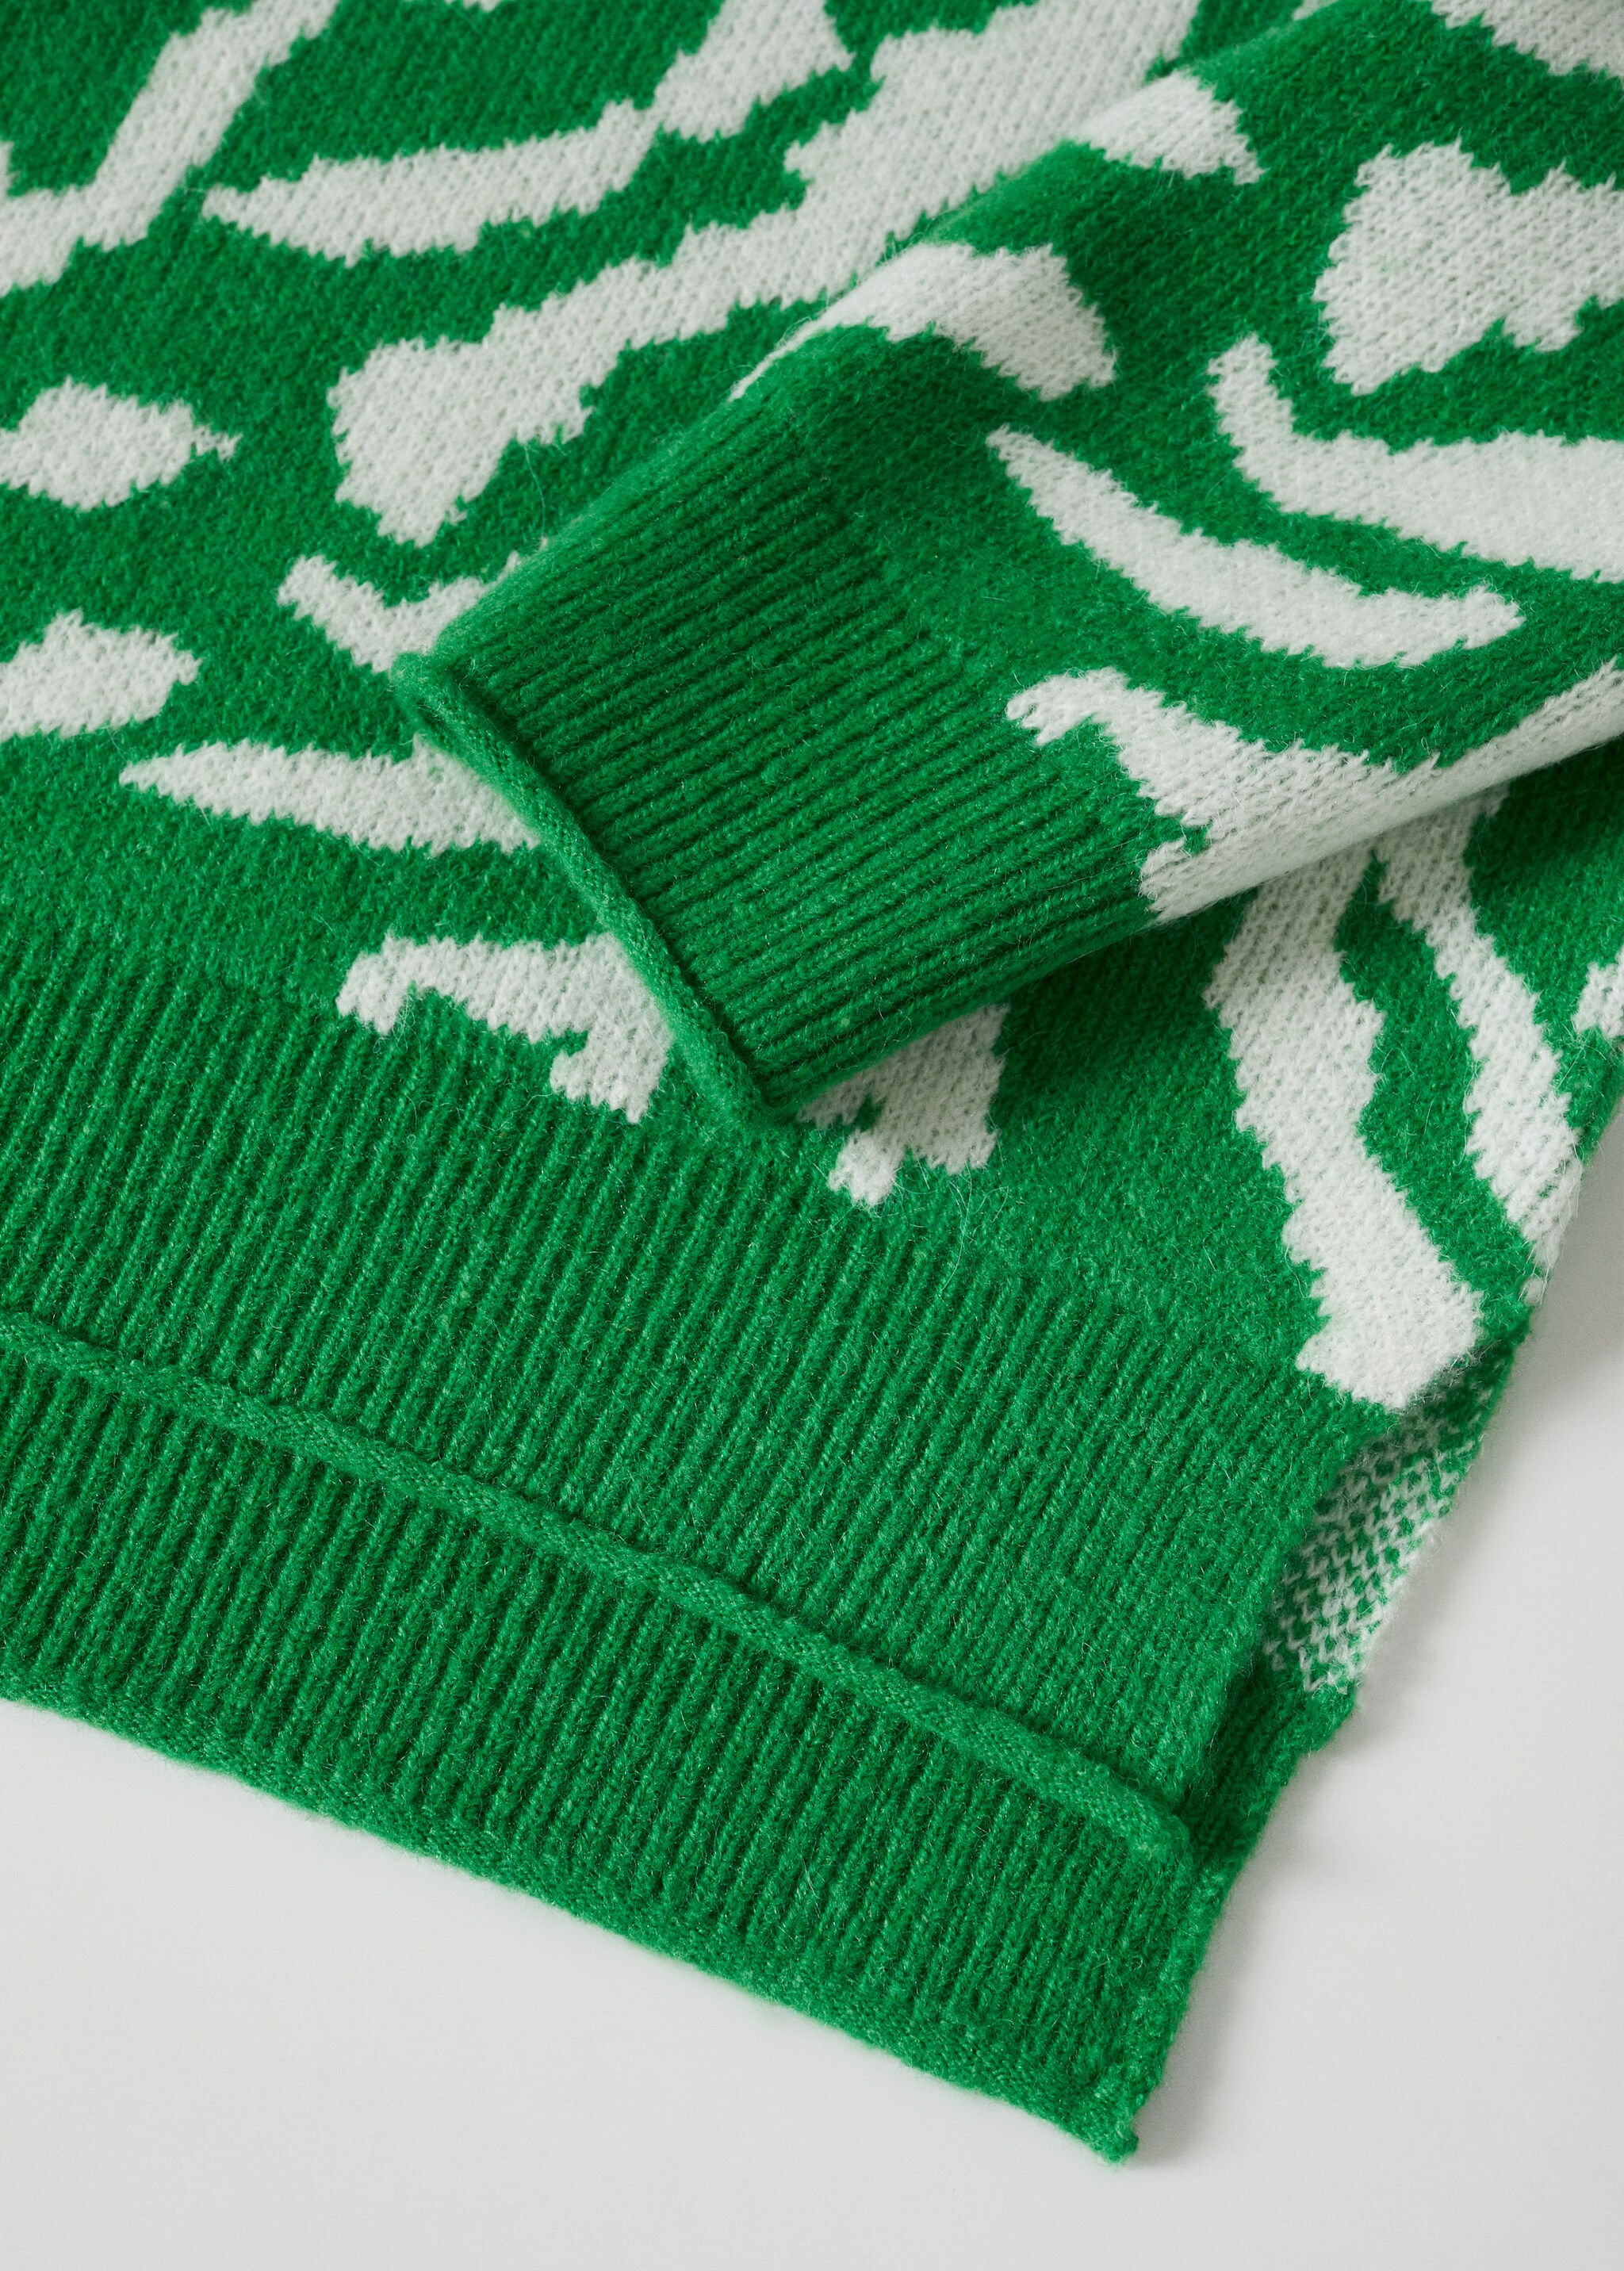 Animal print knit jersey - Details of the article 8